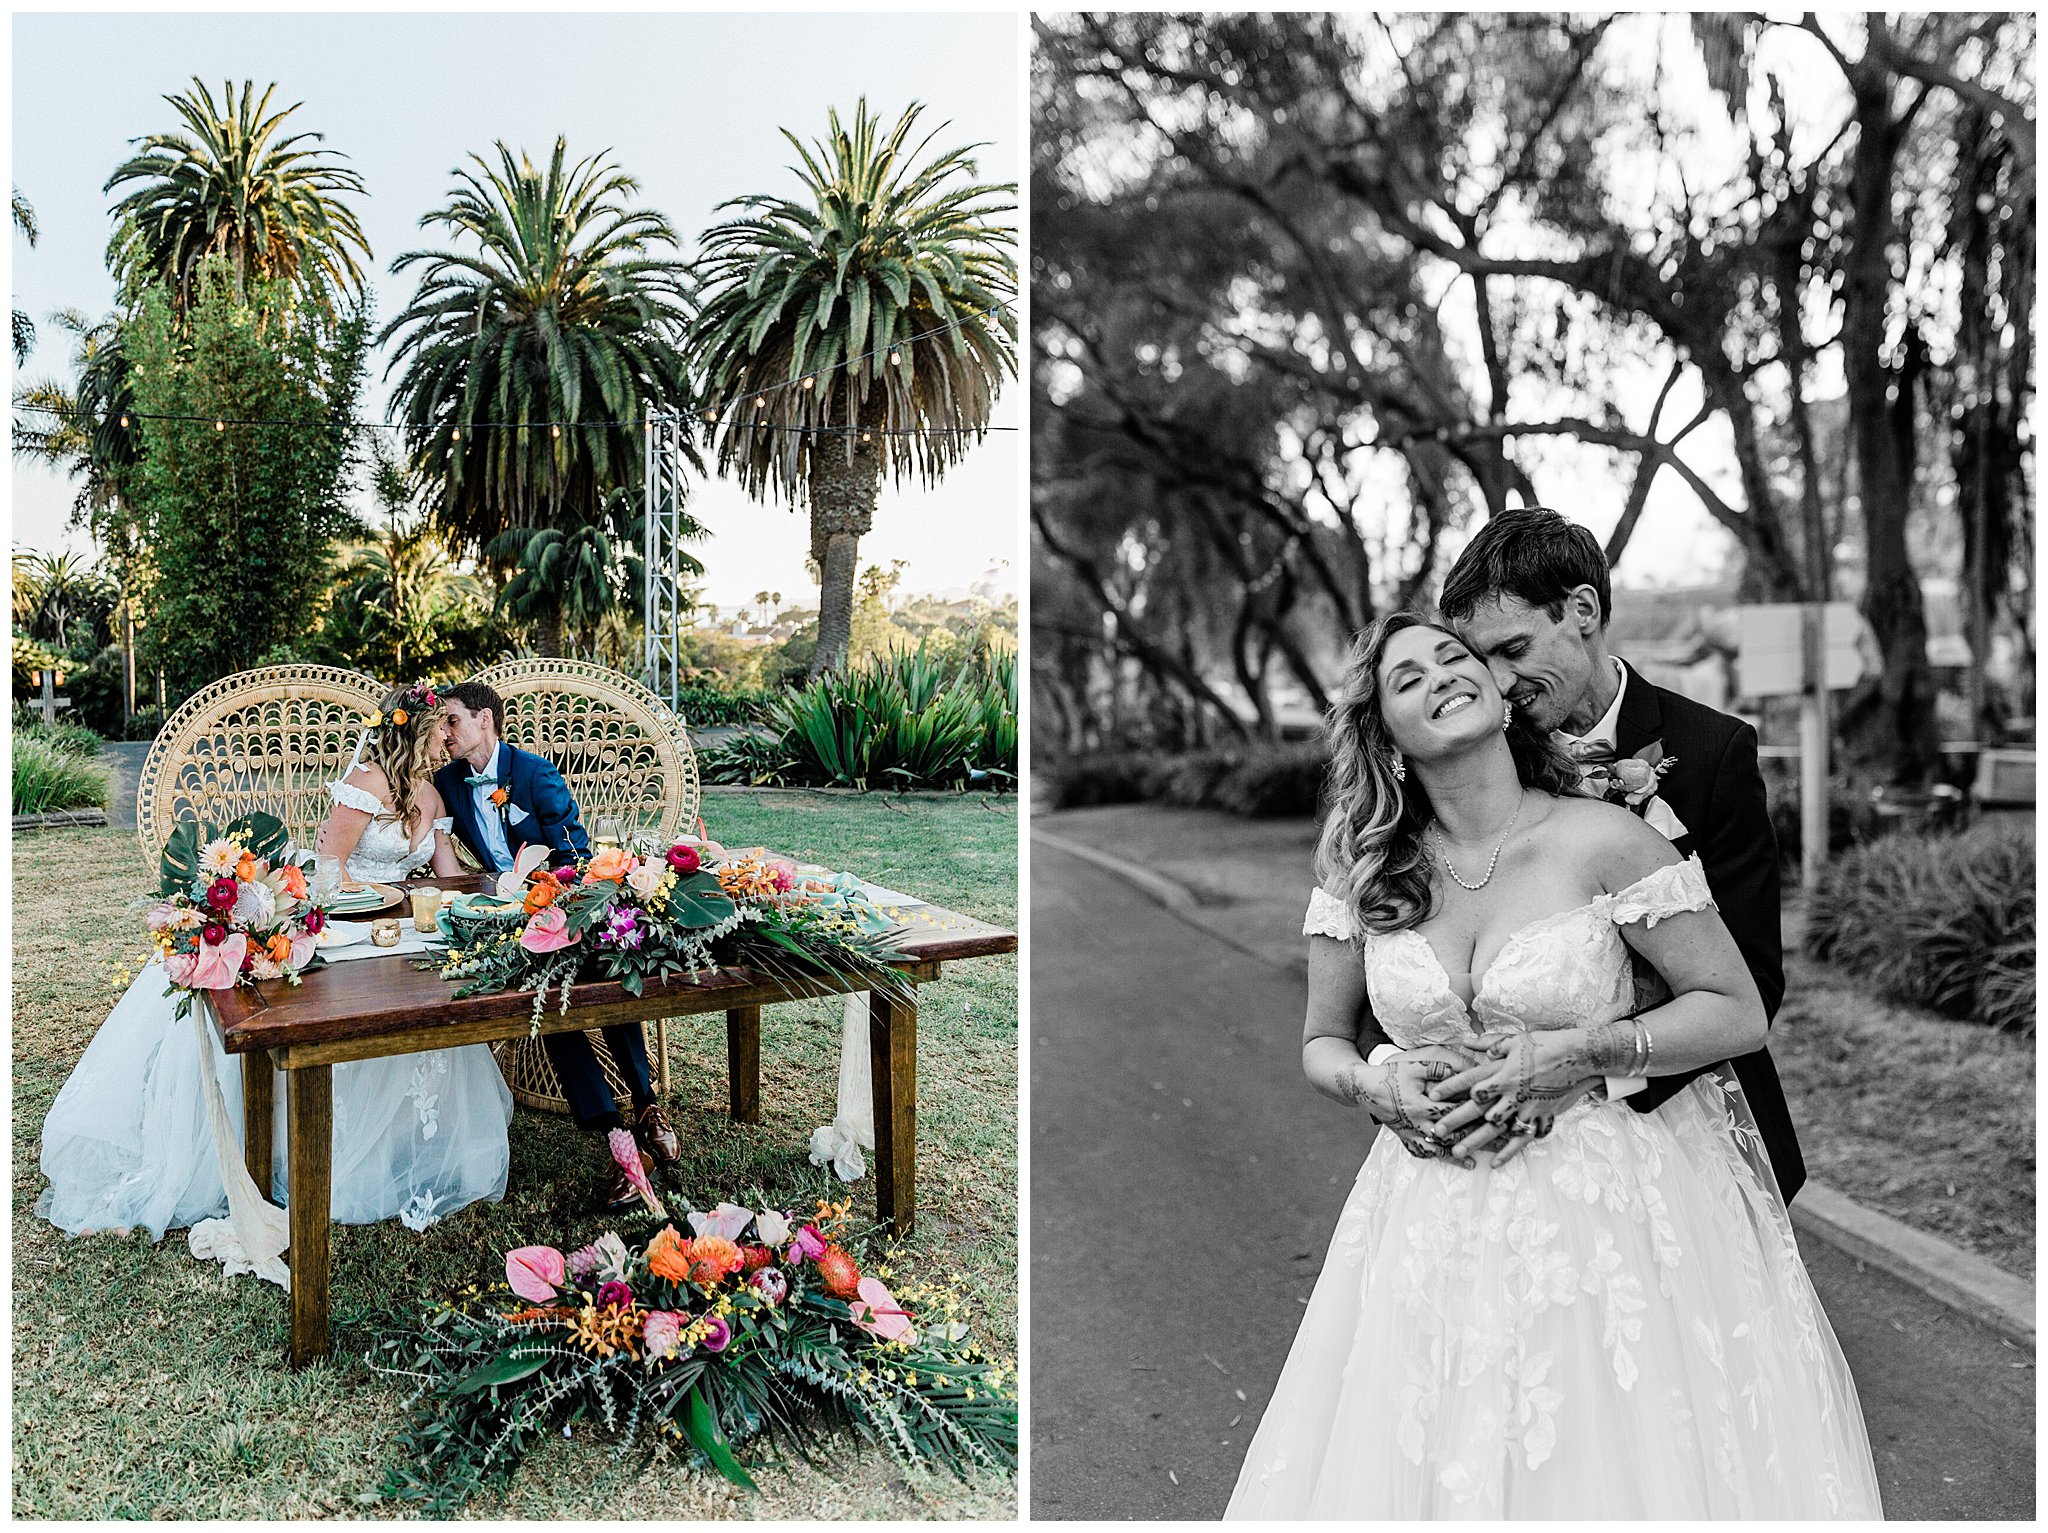 A bright and groom kiss during their wedding ceremony at the Santa Barbara zoo, surrounded by colorful, botanical flowers for a unique and whimsical wedding day experience.